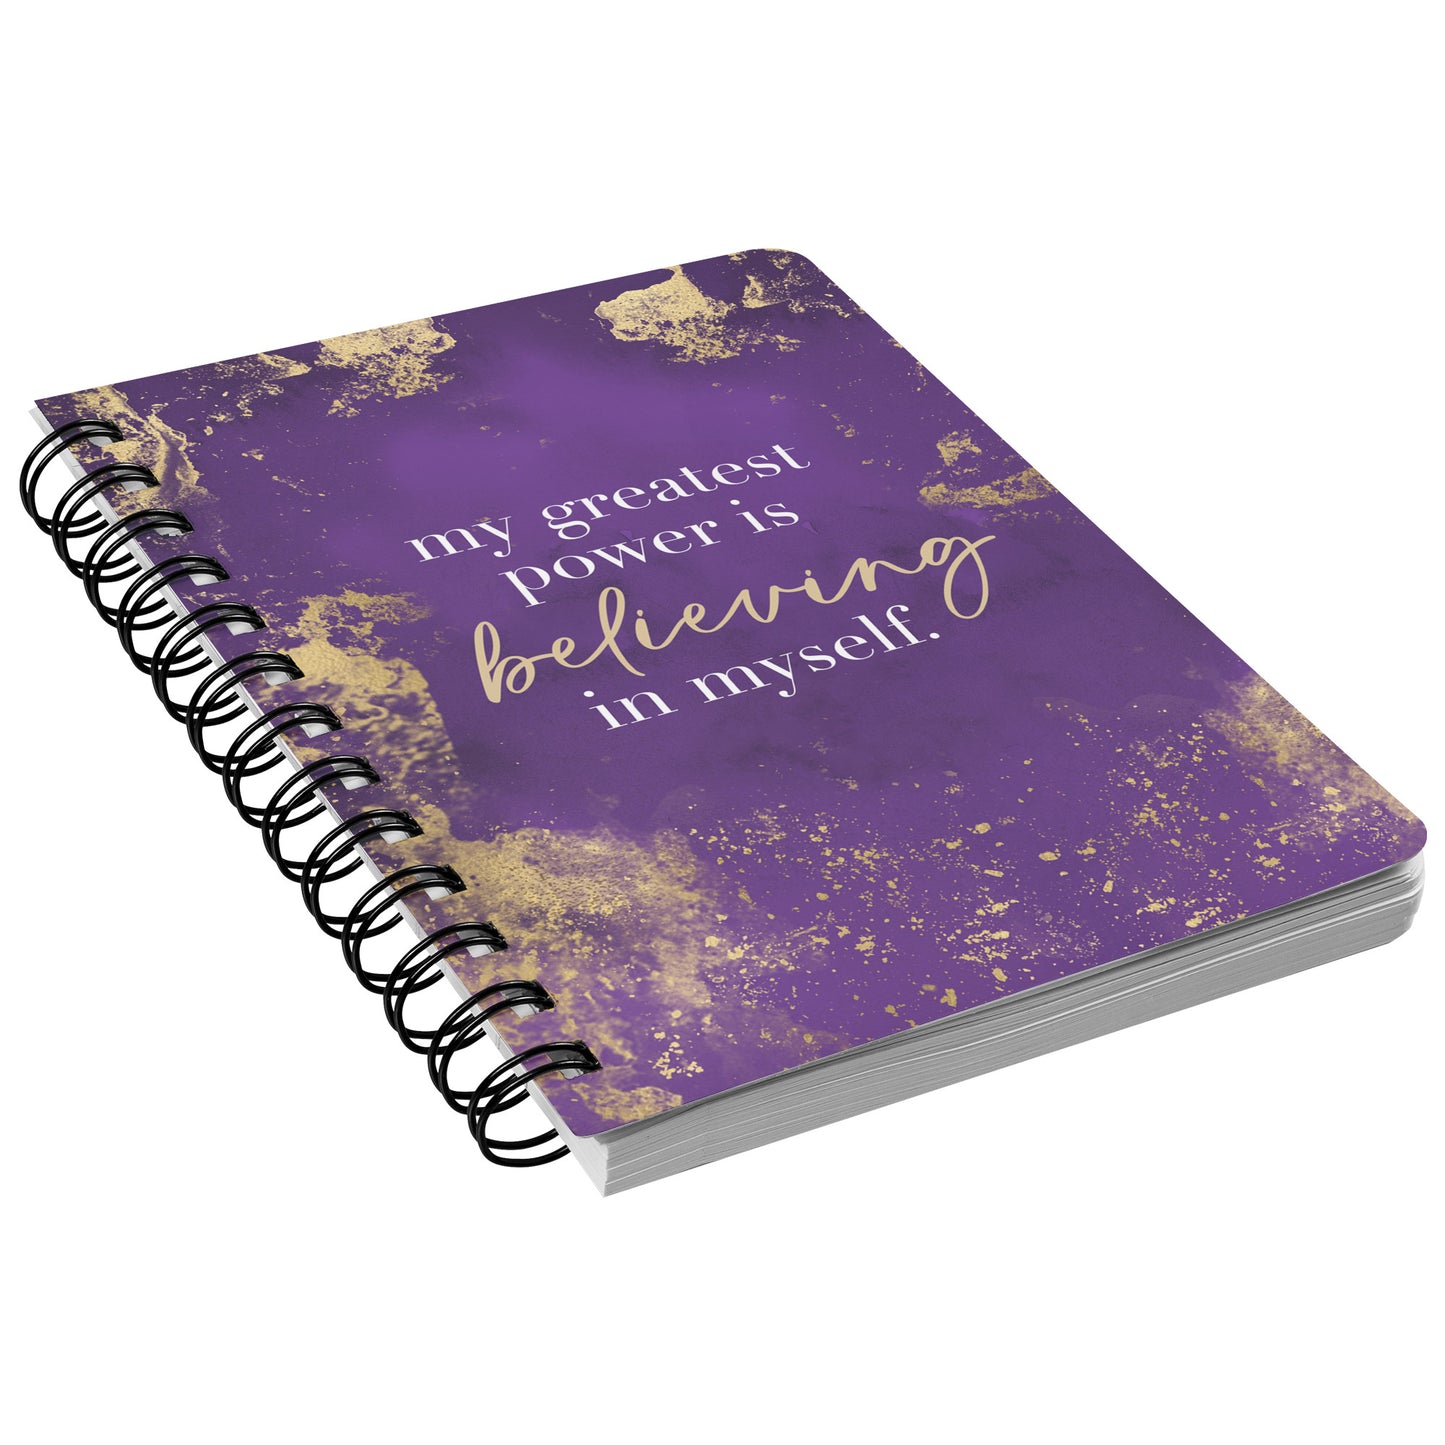 My Greatest Power is Believing in Myself Journal